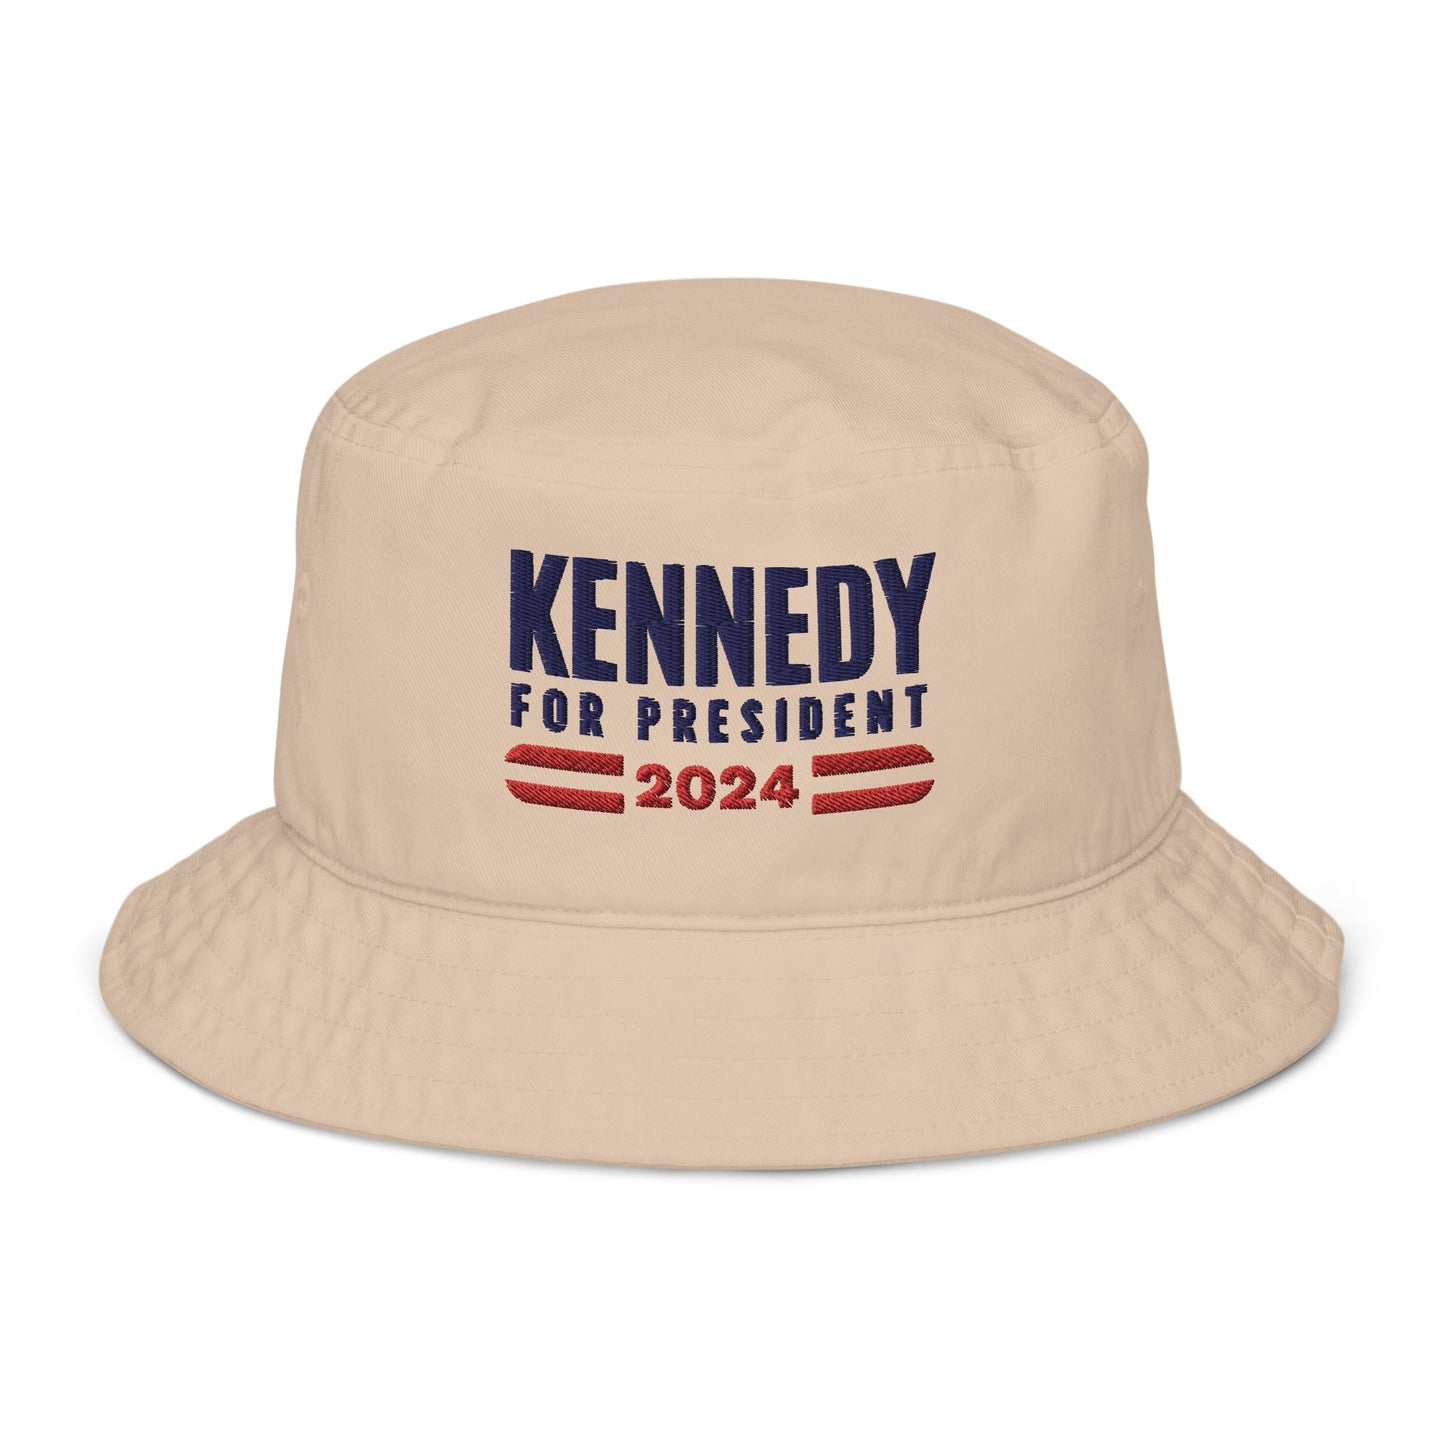 Kennedy For President Bucket Hat - TEAM KENNEDY. All rights reserved